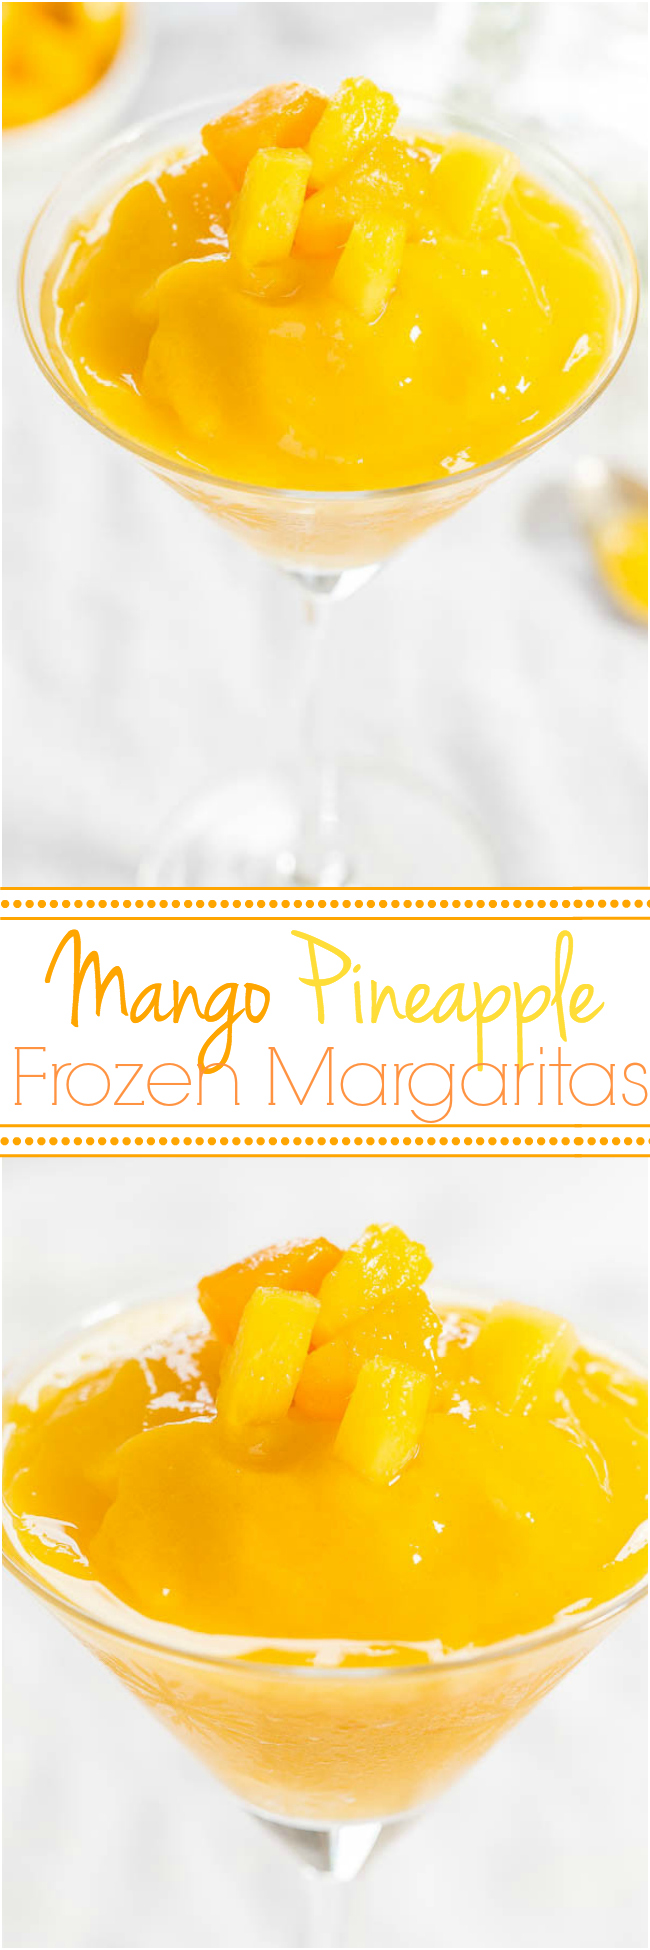 Mango Pineapple Frozen Margaritas - No margarita mix and no sugar needed for amazing, easy margaritas that are ready in 30 seconds!! Refills are a must!!